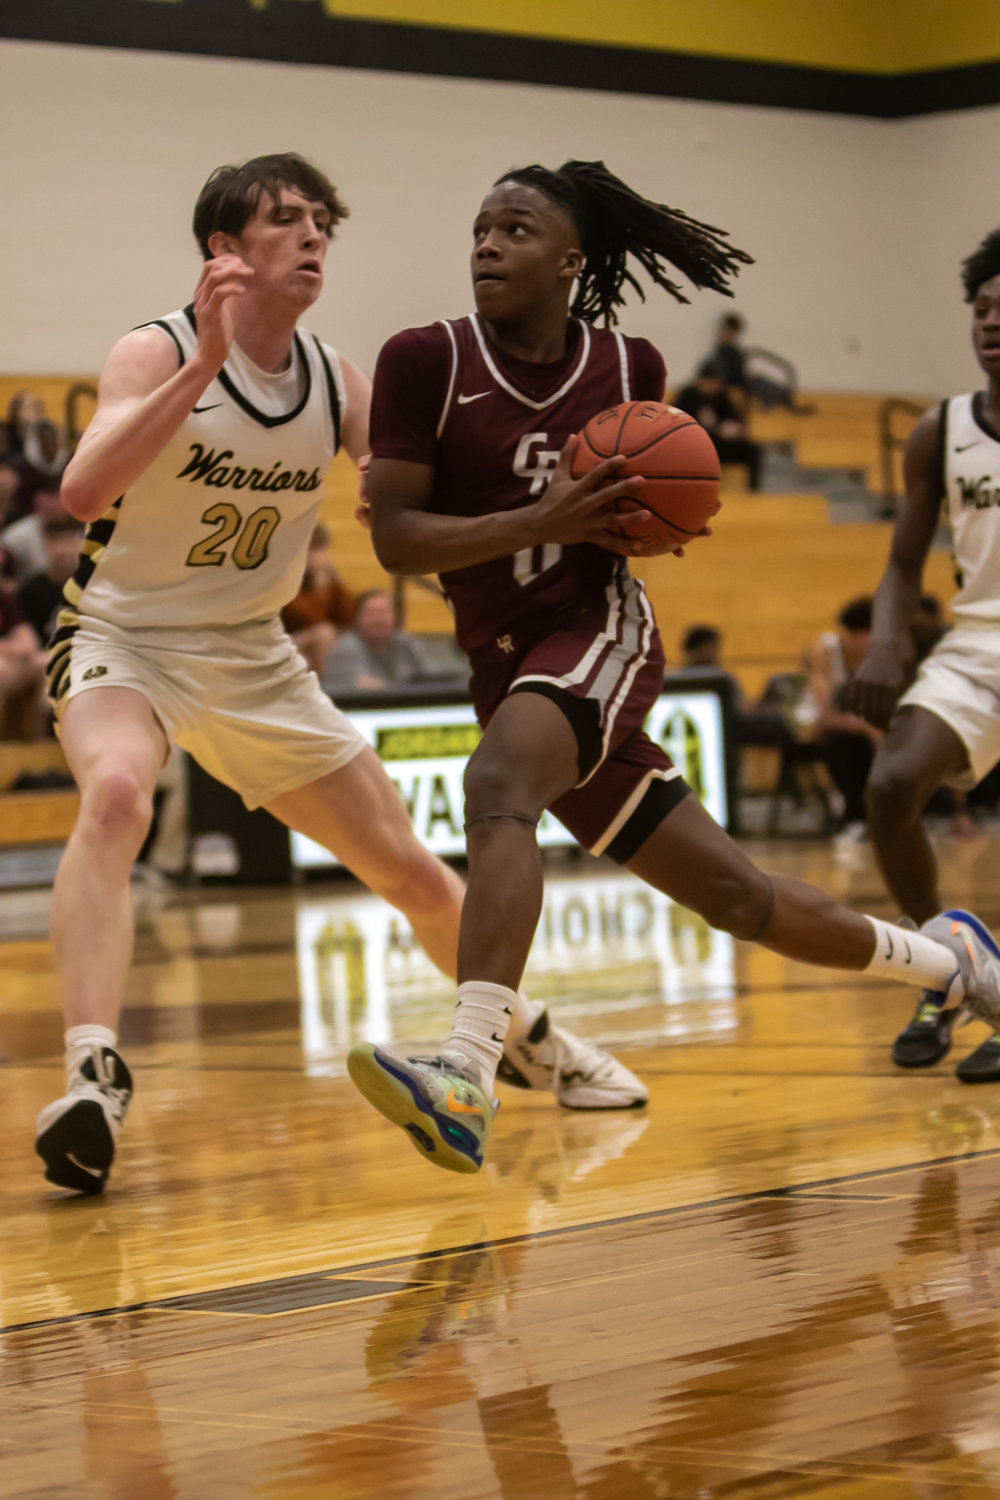 Prince Jones Bynum drives into the lane during Tuesday's game between Cinco Ranch and Jordan at the Jordan gym.